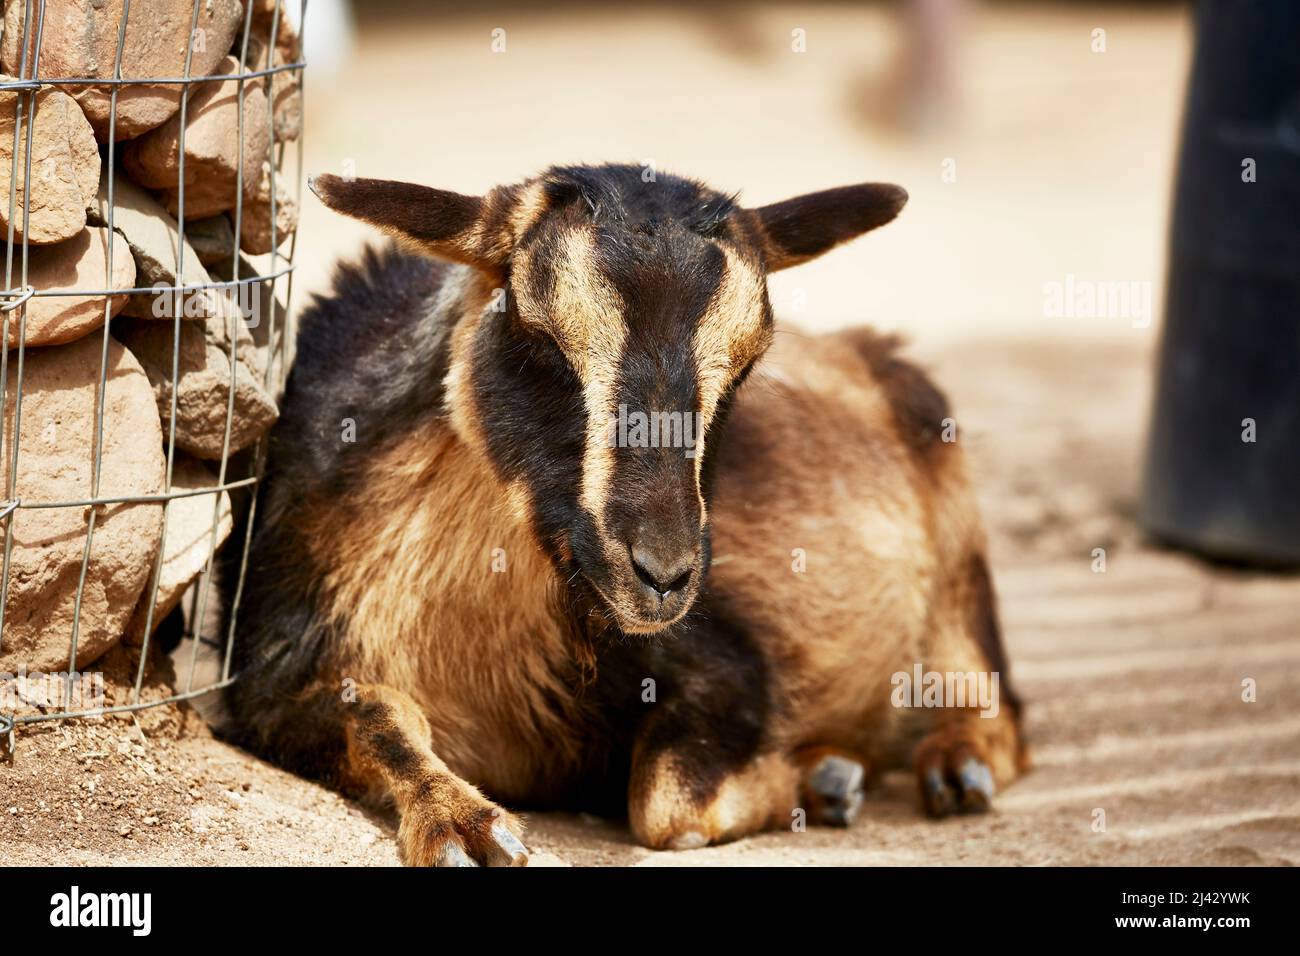 A domesticated goat sleeping in the shade Stock Photo